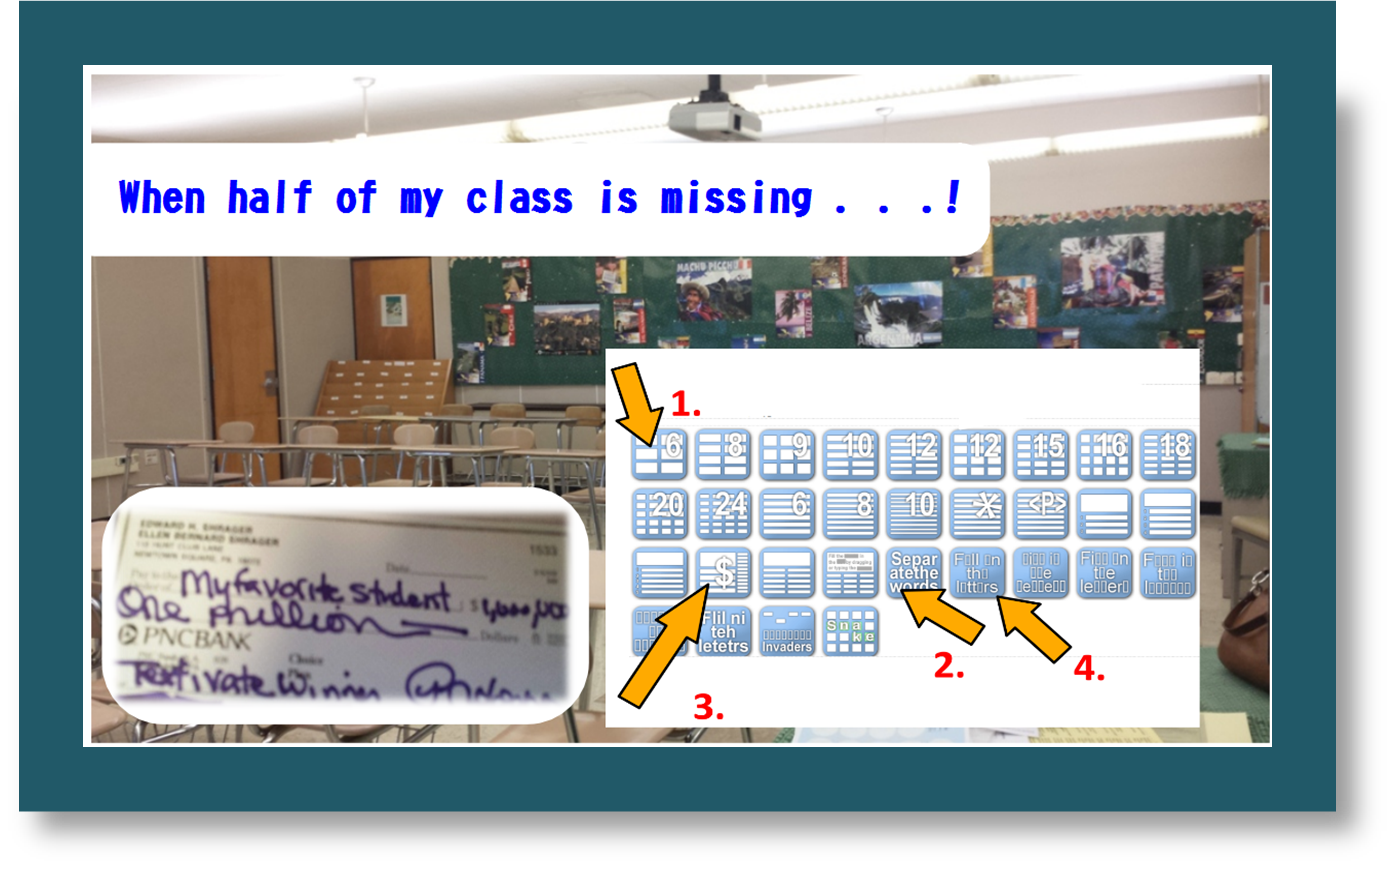 When some students are missing class and you can't introduce new material, use textivate to make them feel like the lucky ones who stayed in class!